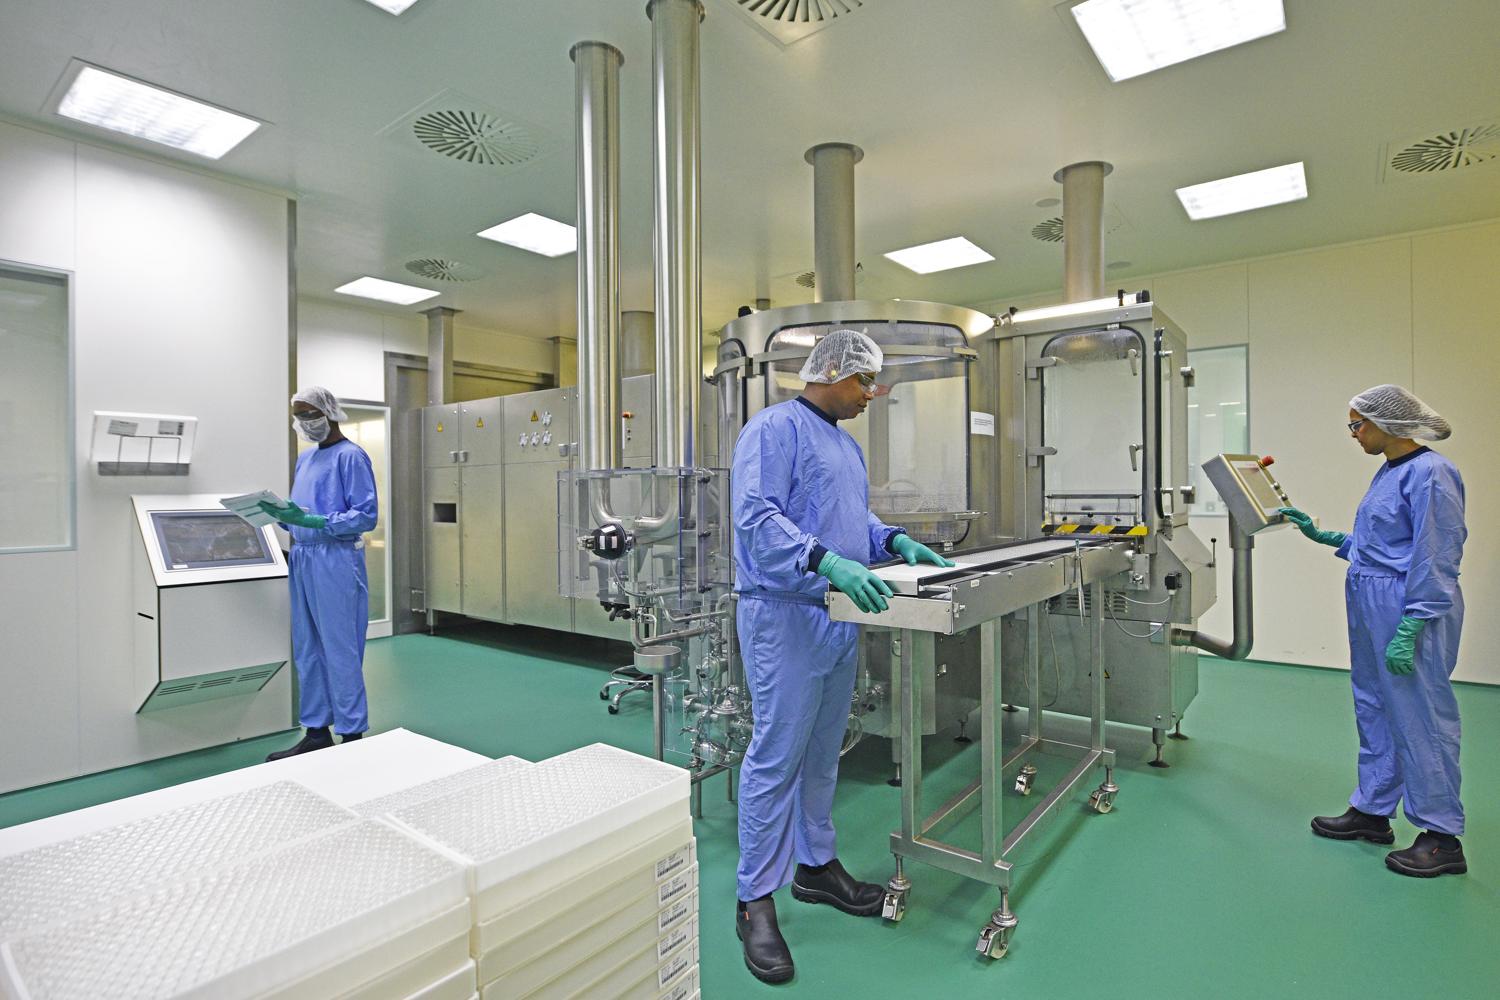 Production of muscle relaxants at Organon in Oss | Brabant Brand Box